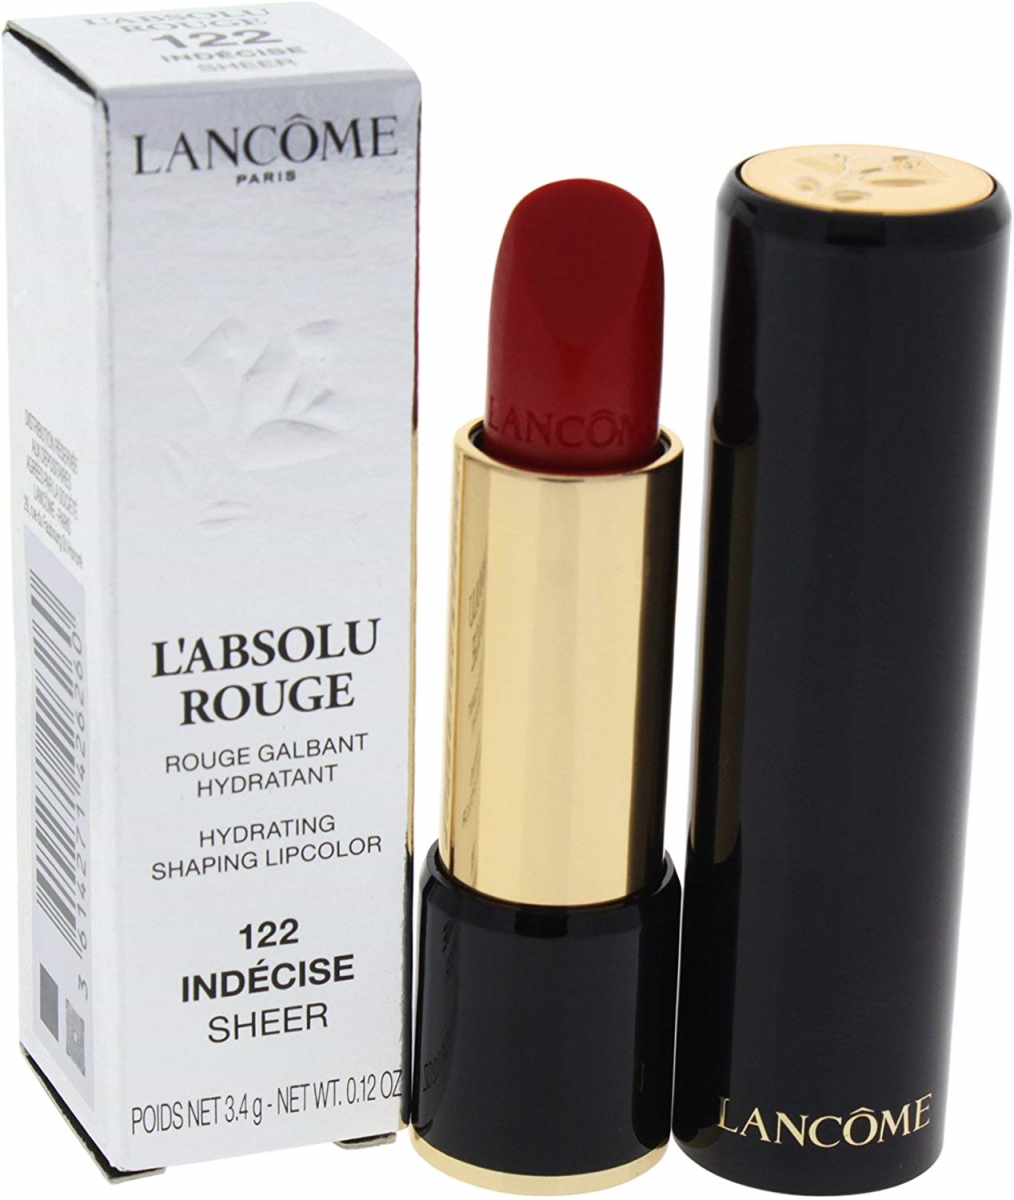 242483 0.12 Oz Labsolu Rouge Hydrating Shaping Lipcolor - No.122 Indecise Sheer